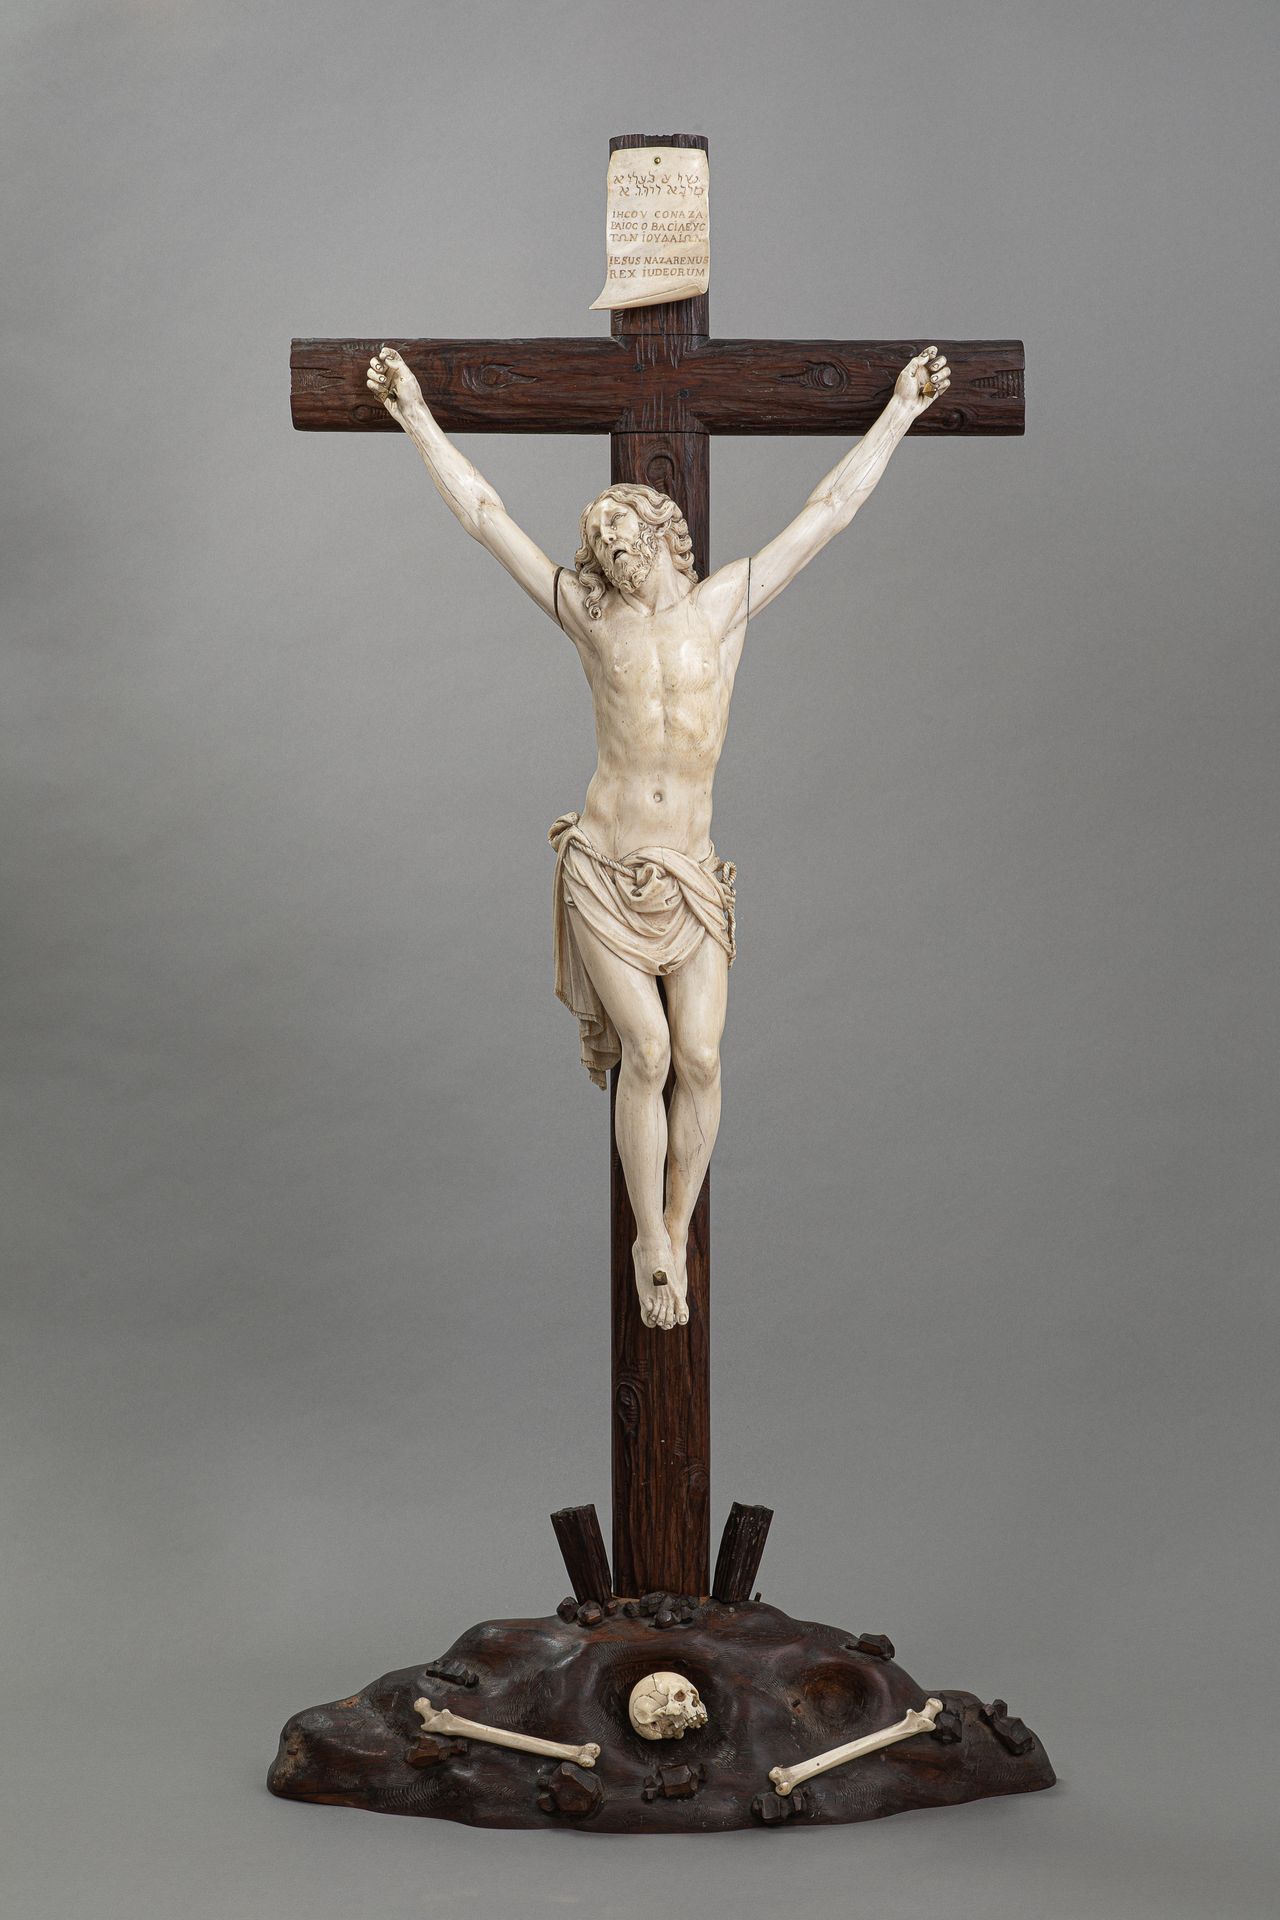 Null Walter POMPE (1703-1777) Antwerp, 1771

Christ on the Cross

Ivory

Signed &hellip;